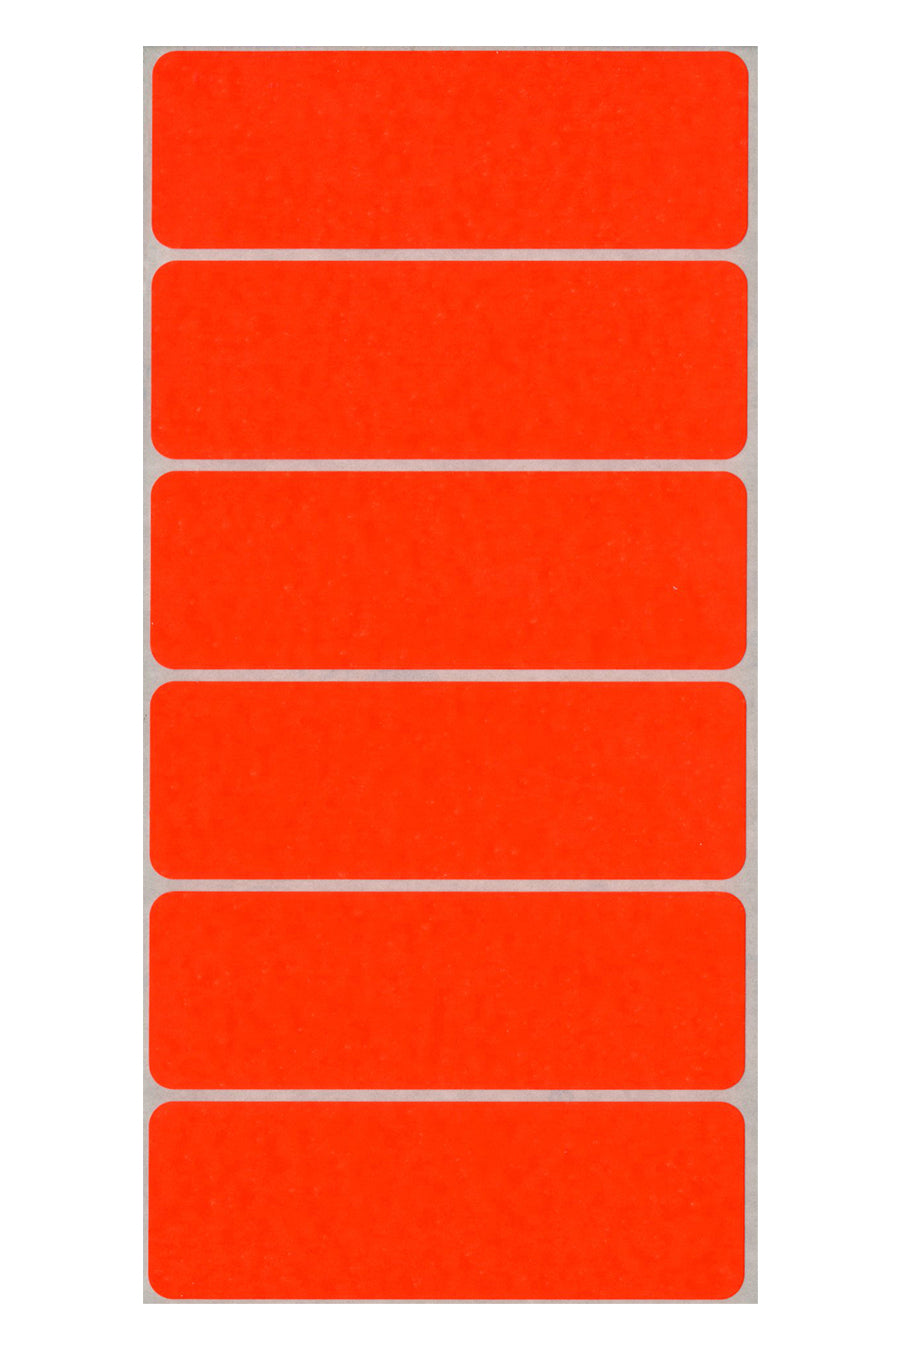 1" x 3" Color Coding Labels, Red Neon, 200/Bx